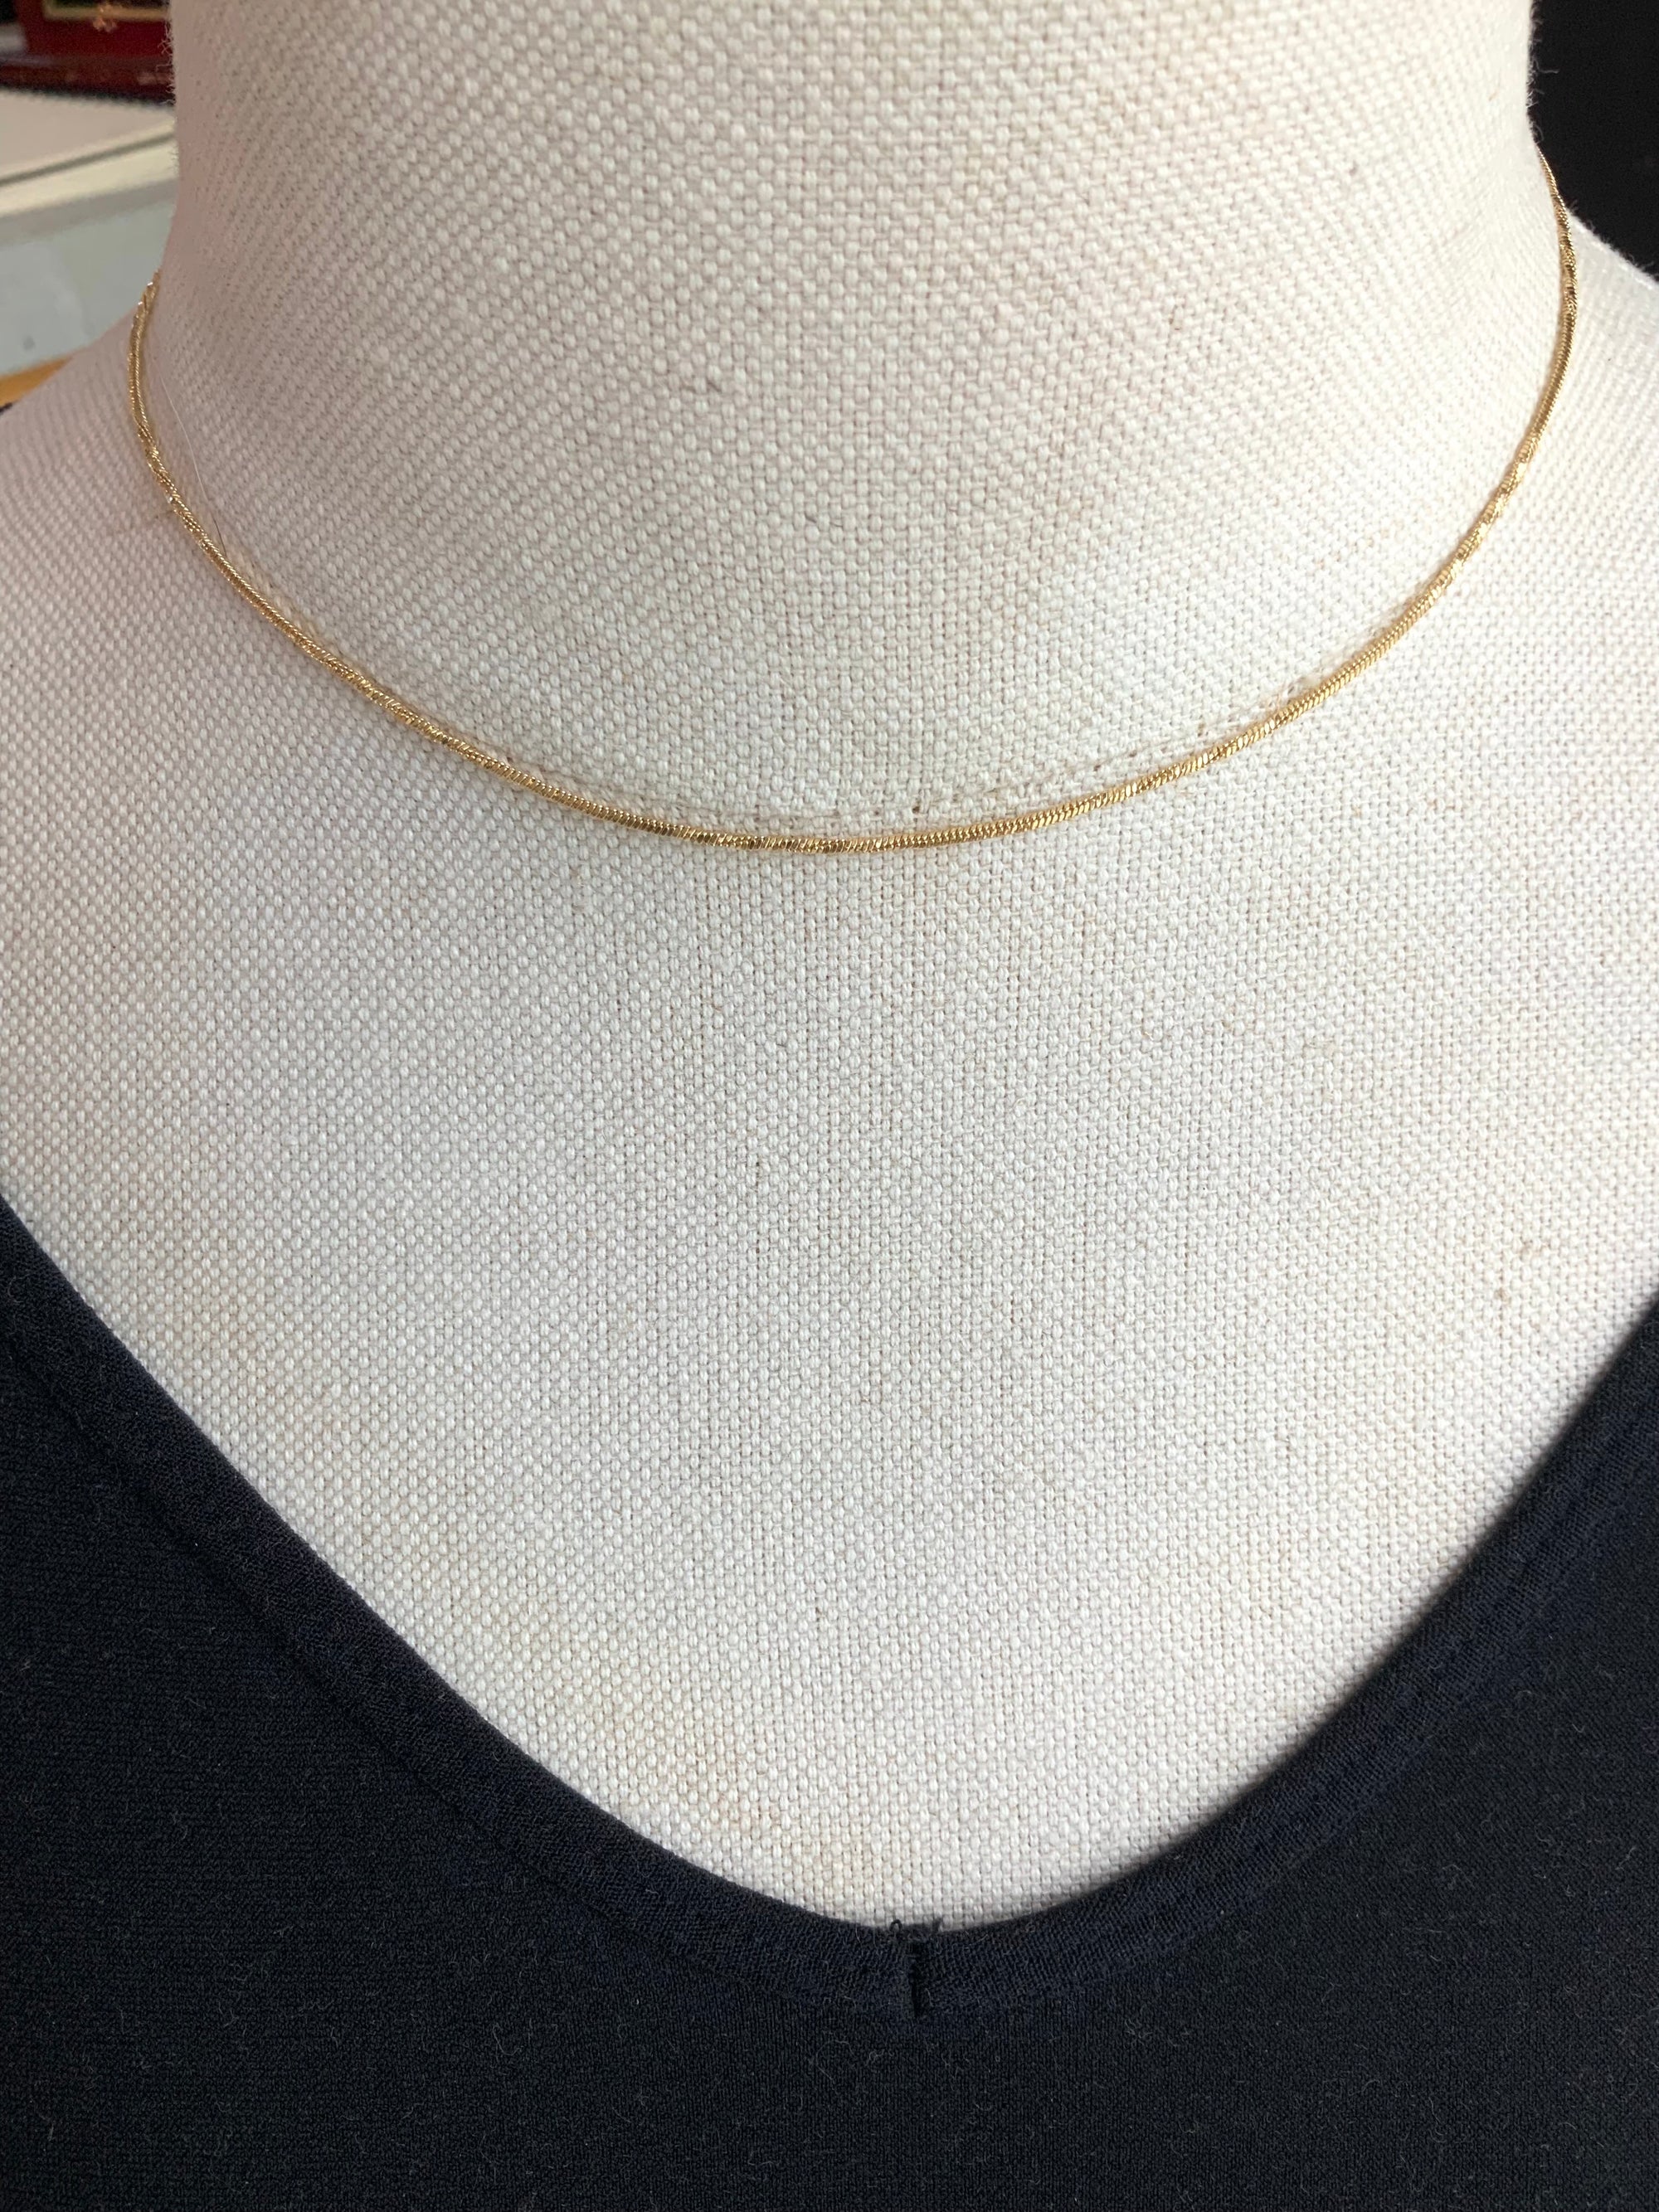 18k Gold Filled Interspersed Twisted Chain